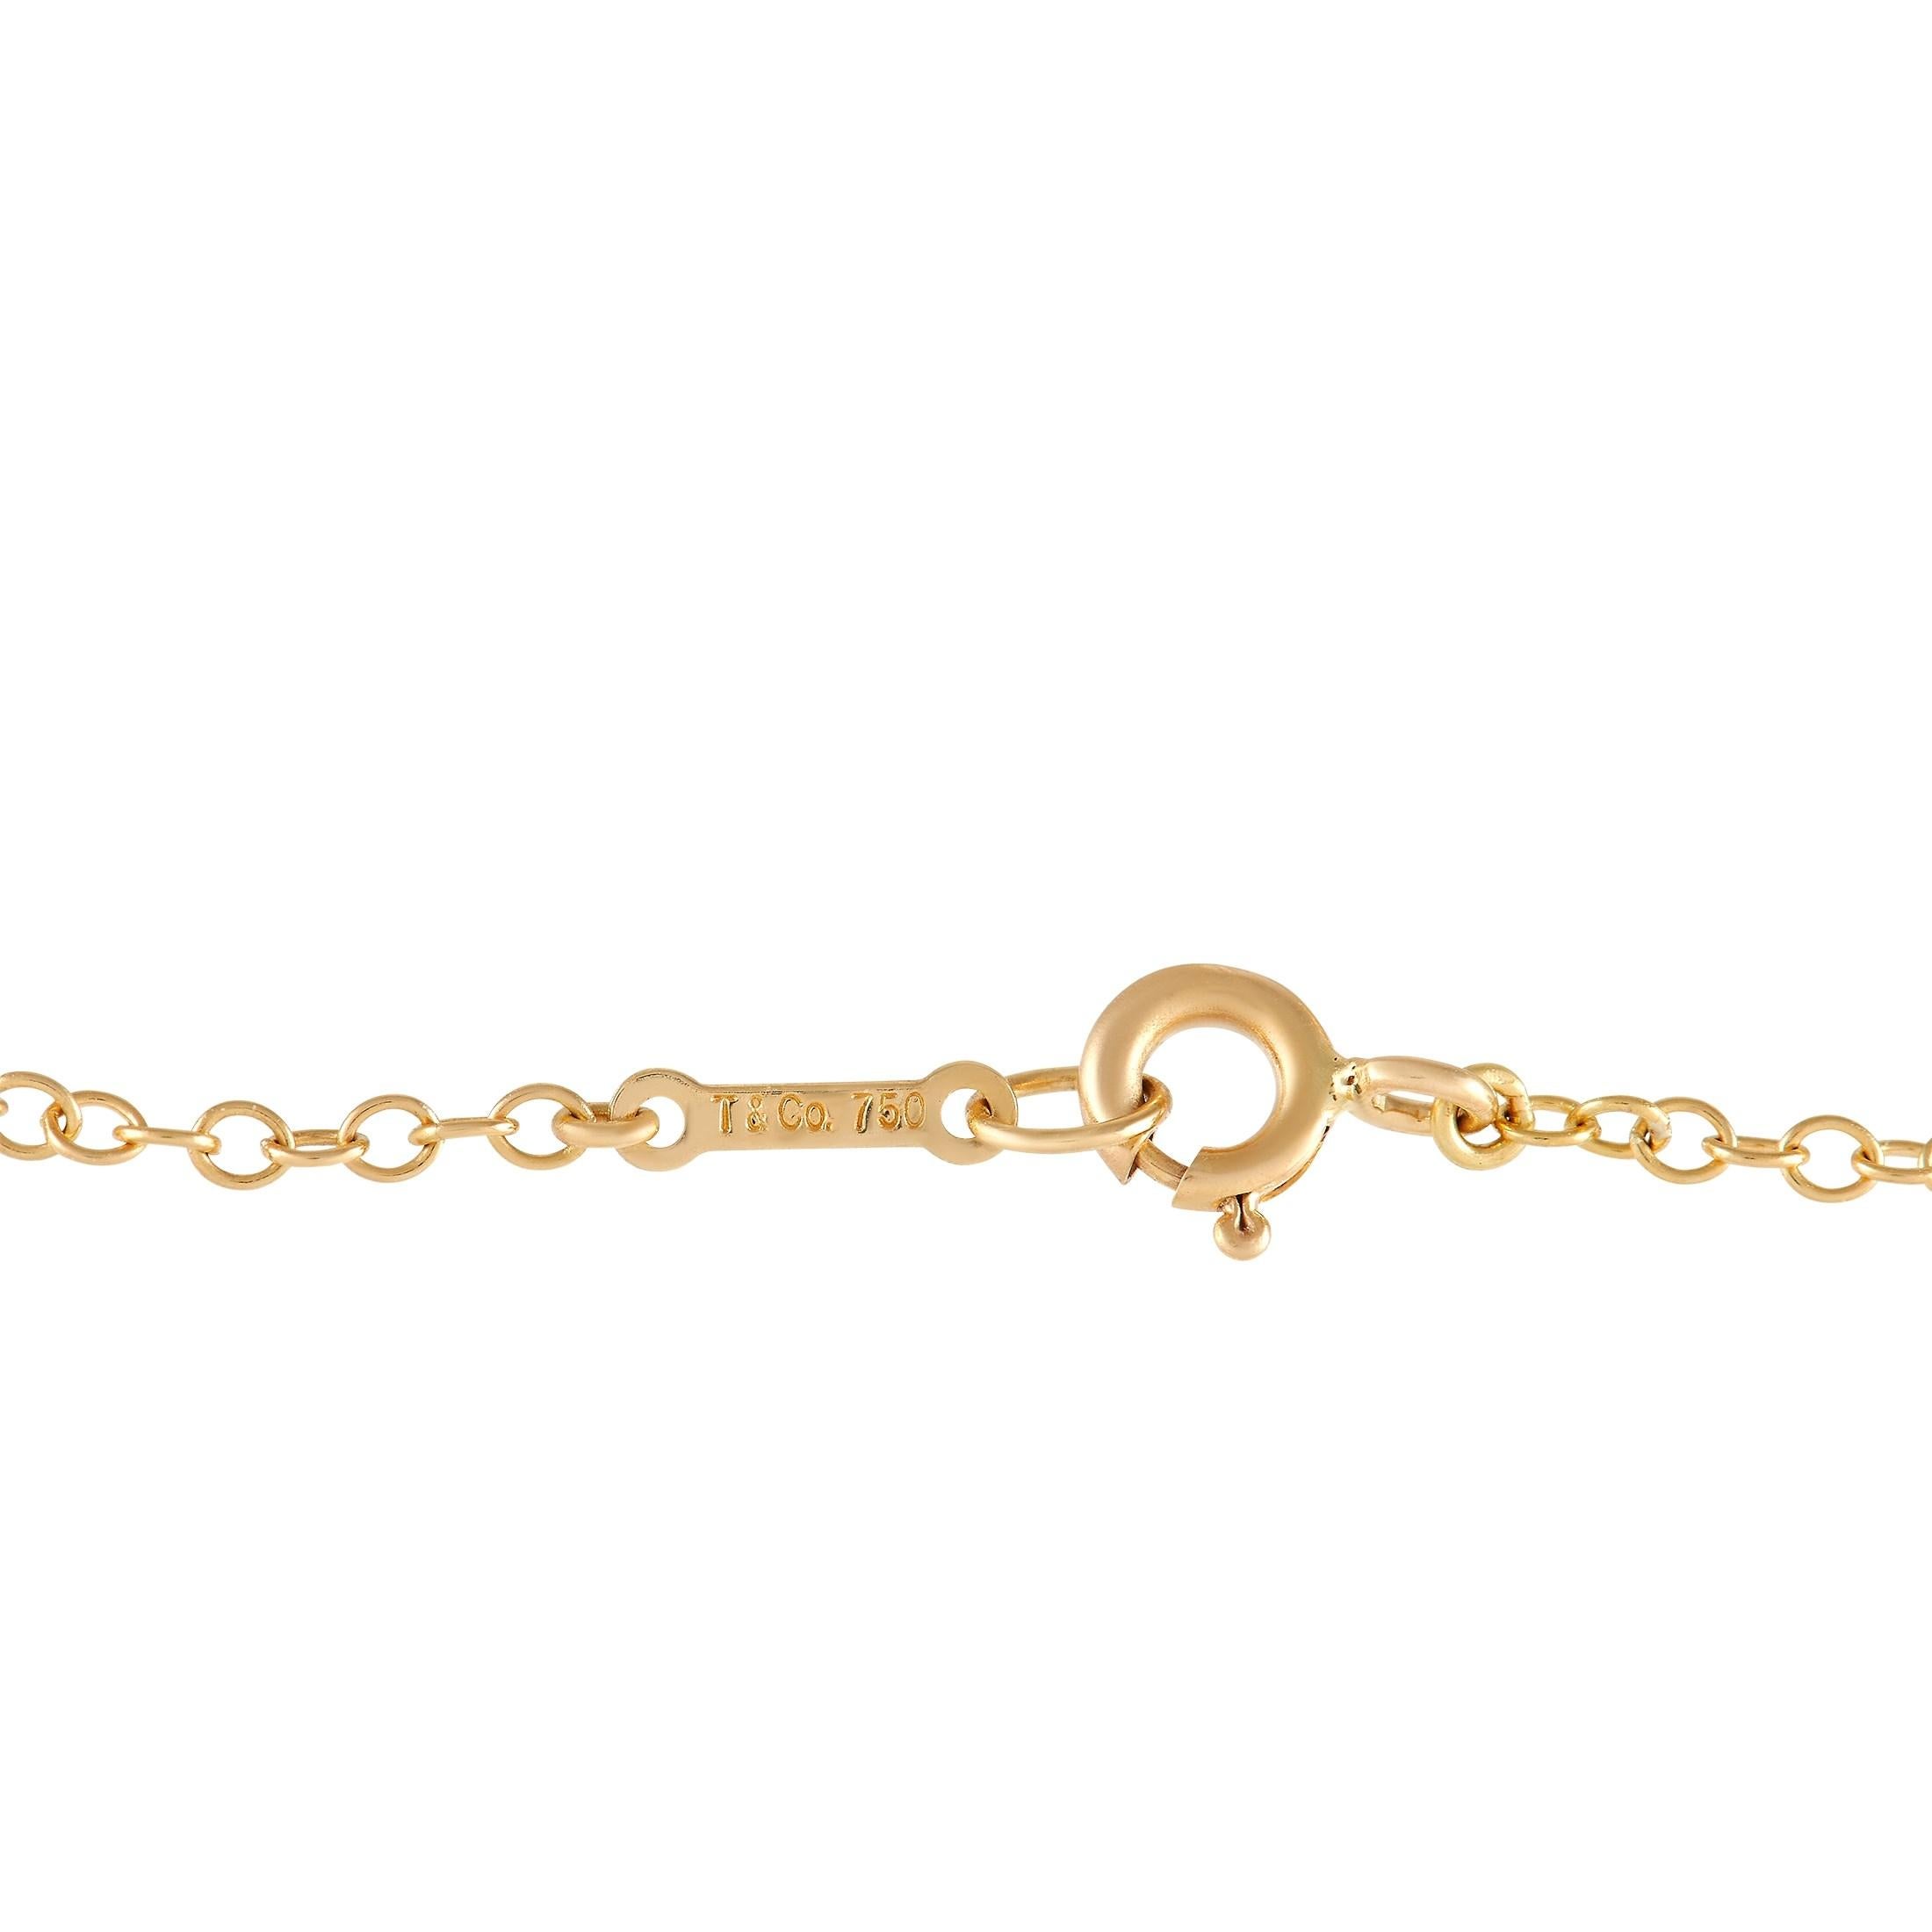 See sophistication come to life with this Tiffany & Co. Elsa Peretti Tear Drop Bracelet. It features Tiffany & Co's artistic elegance combined with Elsa Peretti's organic and sensual aesthetic. This 6.75-inch chain bracelet with a spring ring clasp